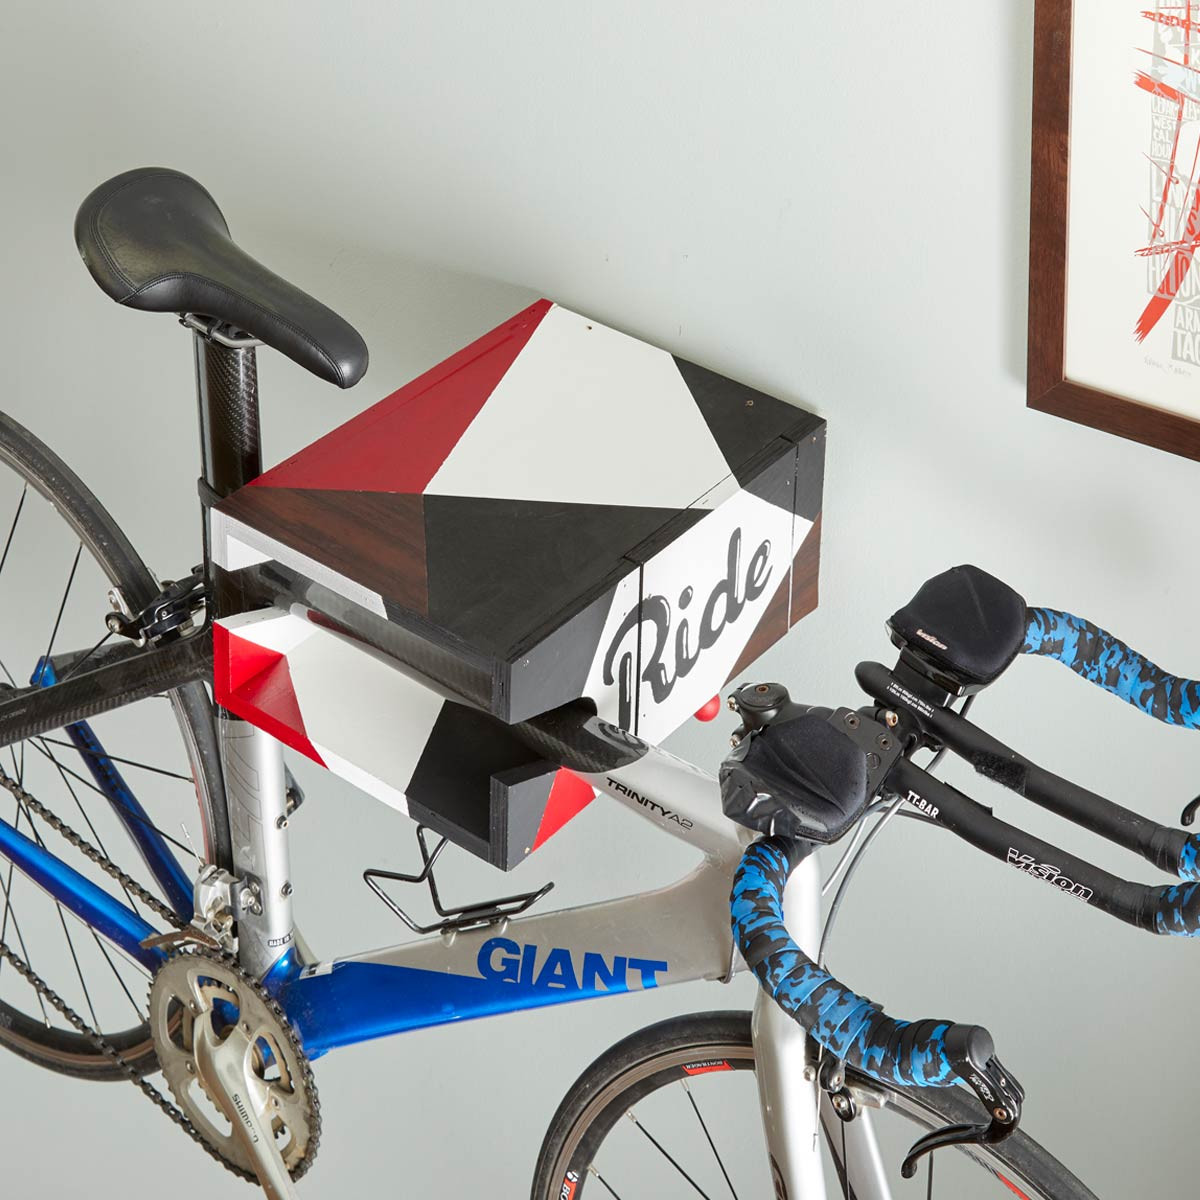 DIY Wall Mounted Bike Rack
 How To Build A Wall Mounted Bike Rack With Storage — The